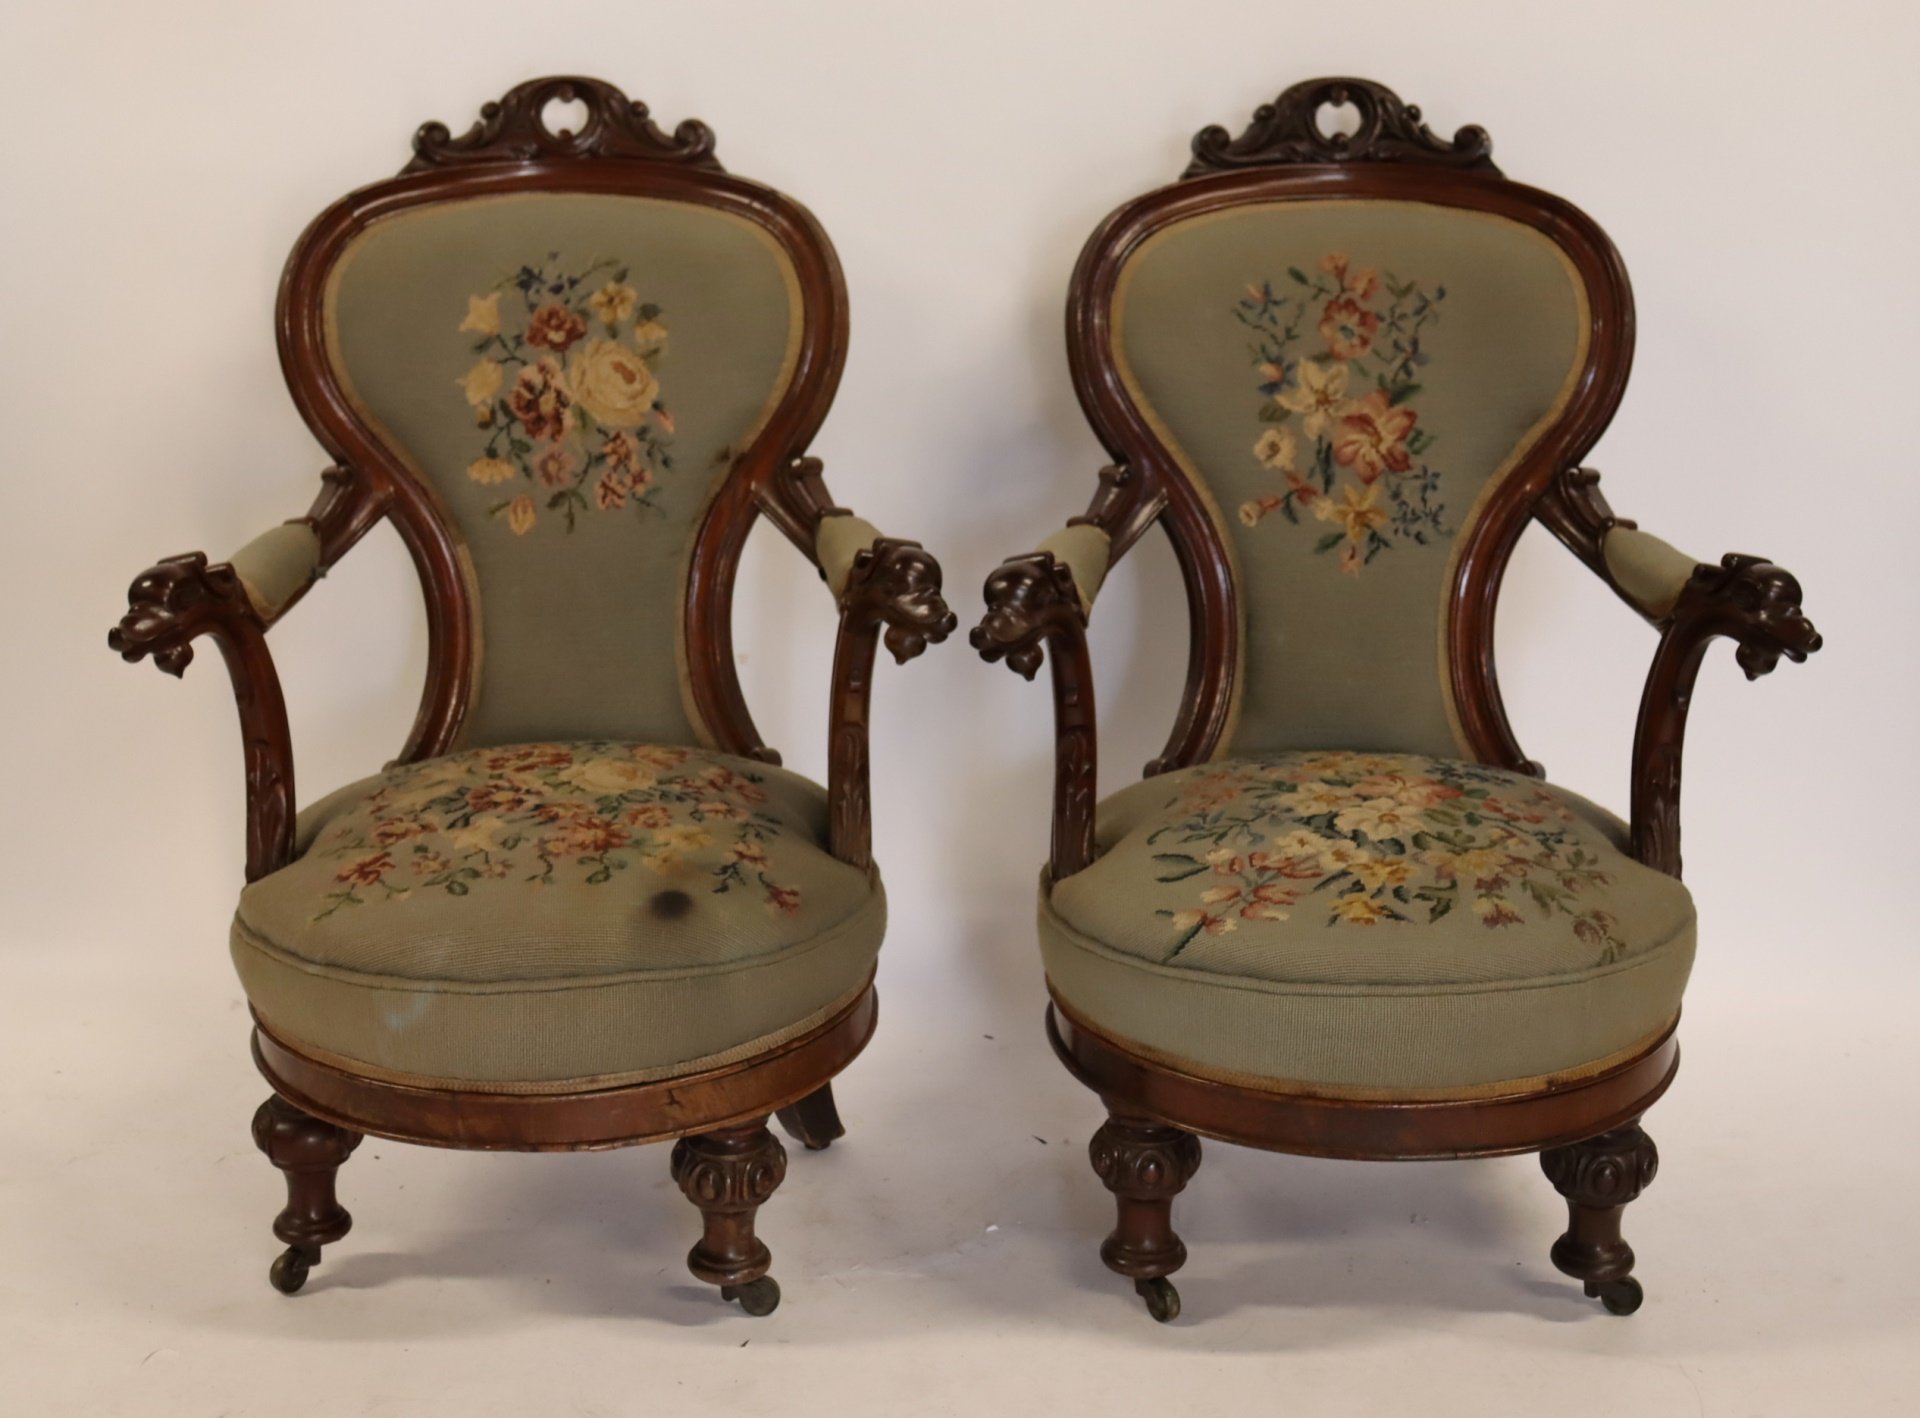 A PAIR OF VICTORIAN PARLOR CHAIRS 3b37c4